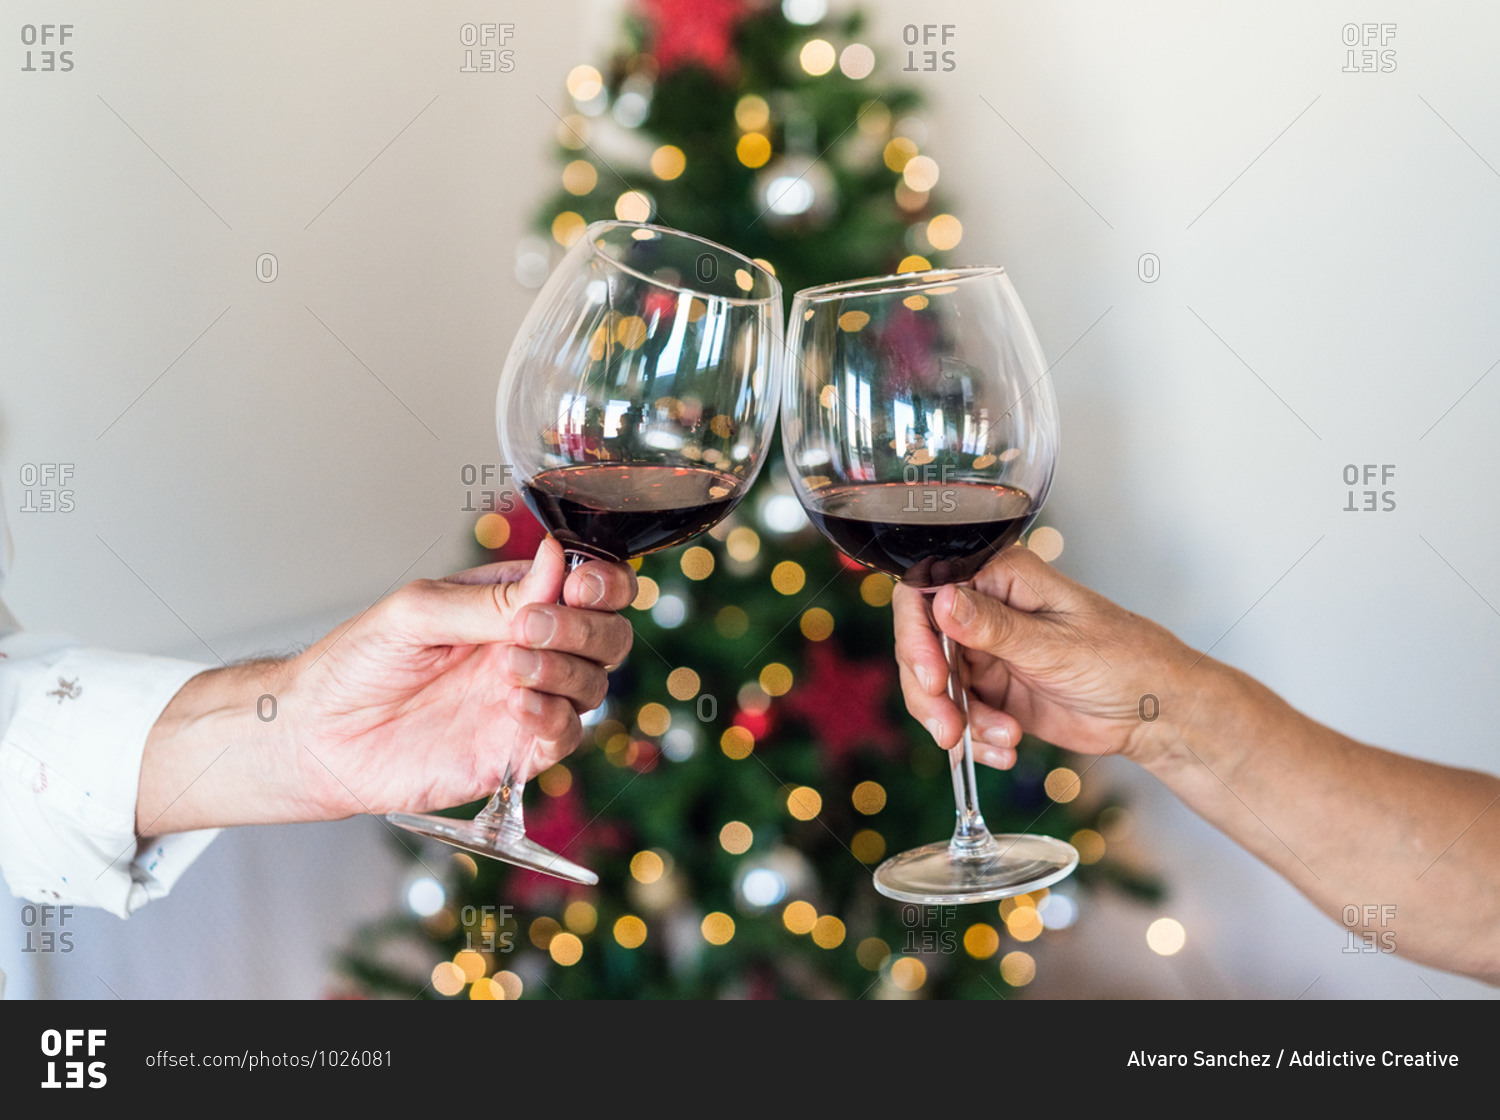 Crop unrecognizable friends with shiny glasses of alcoholic beverage near bright decorative tree during New Year holiday